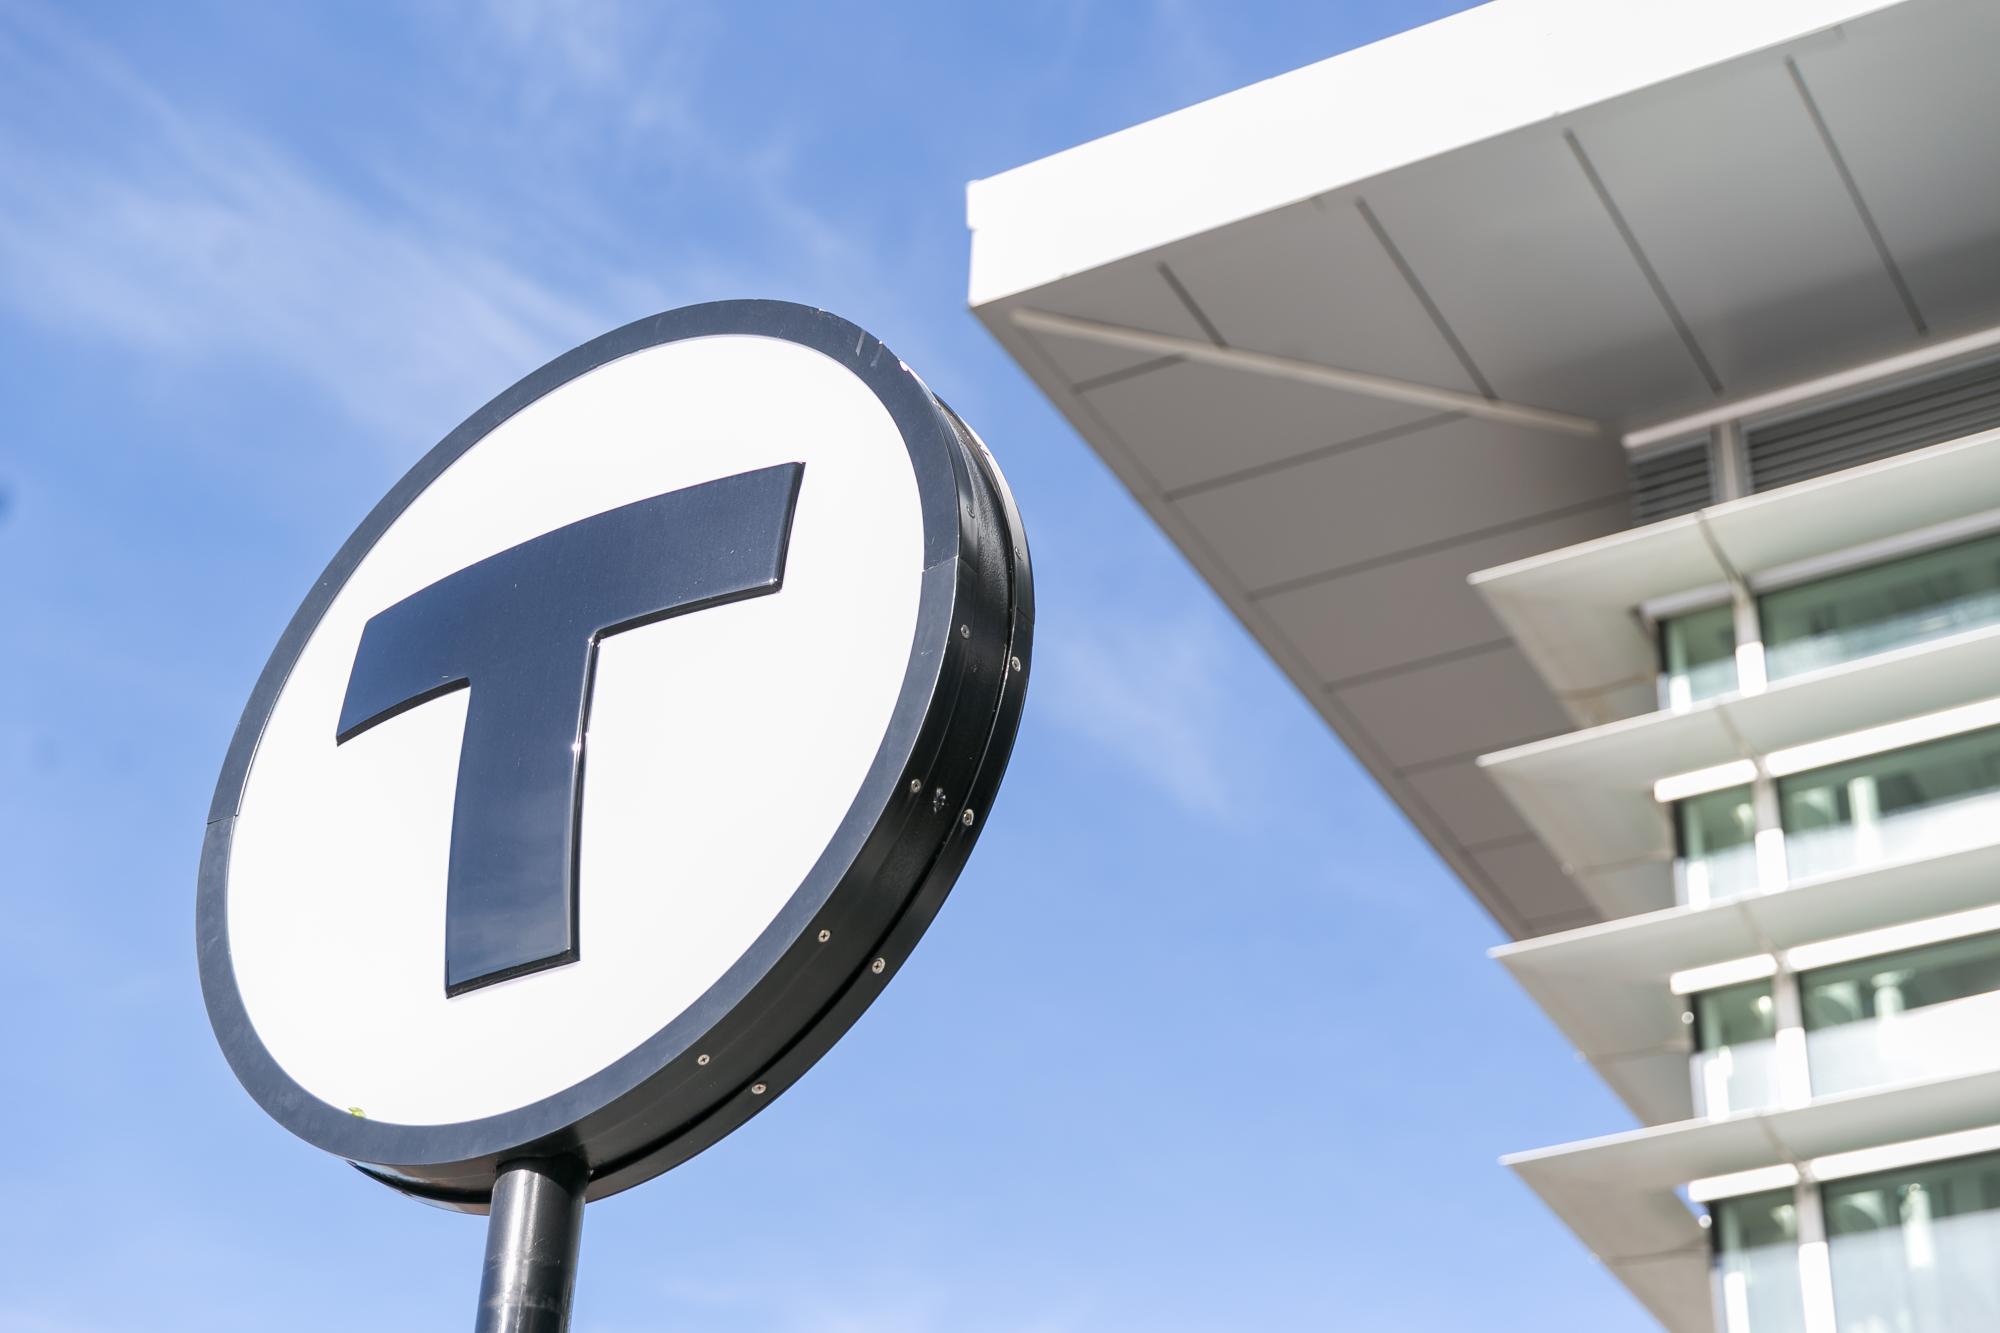 An angled shot of a T logo sign